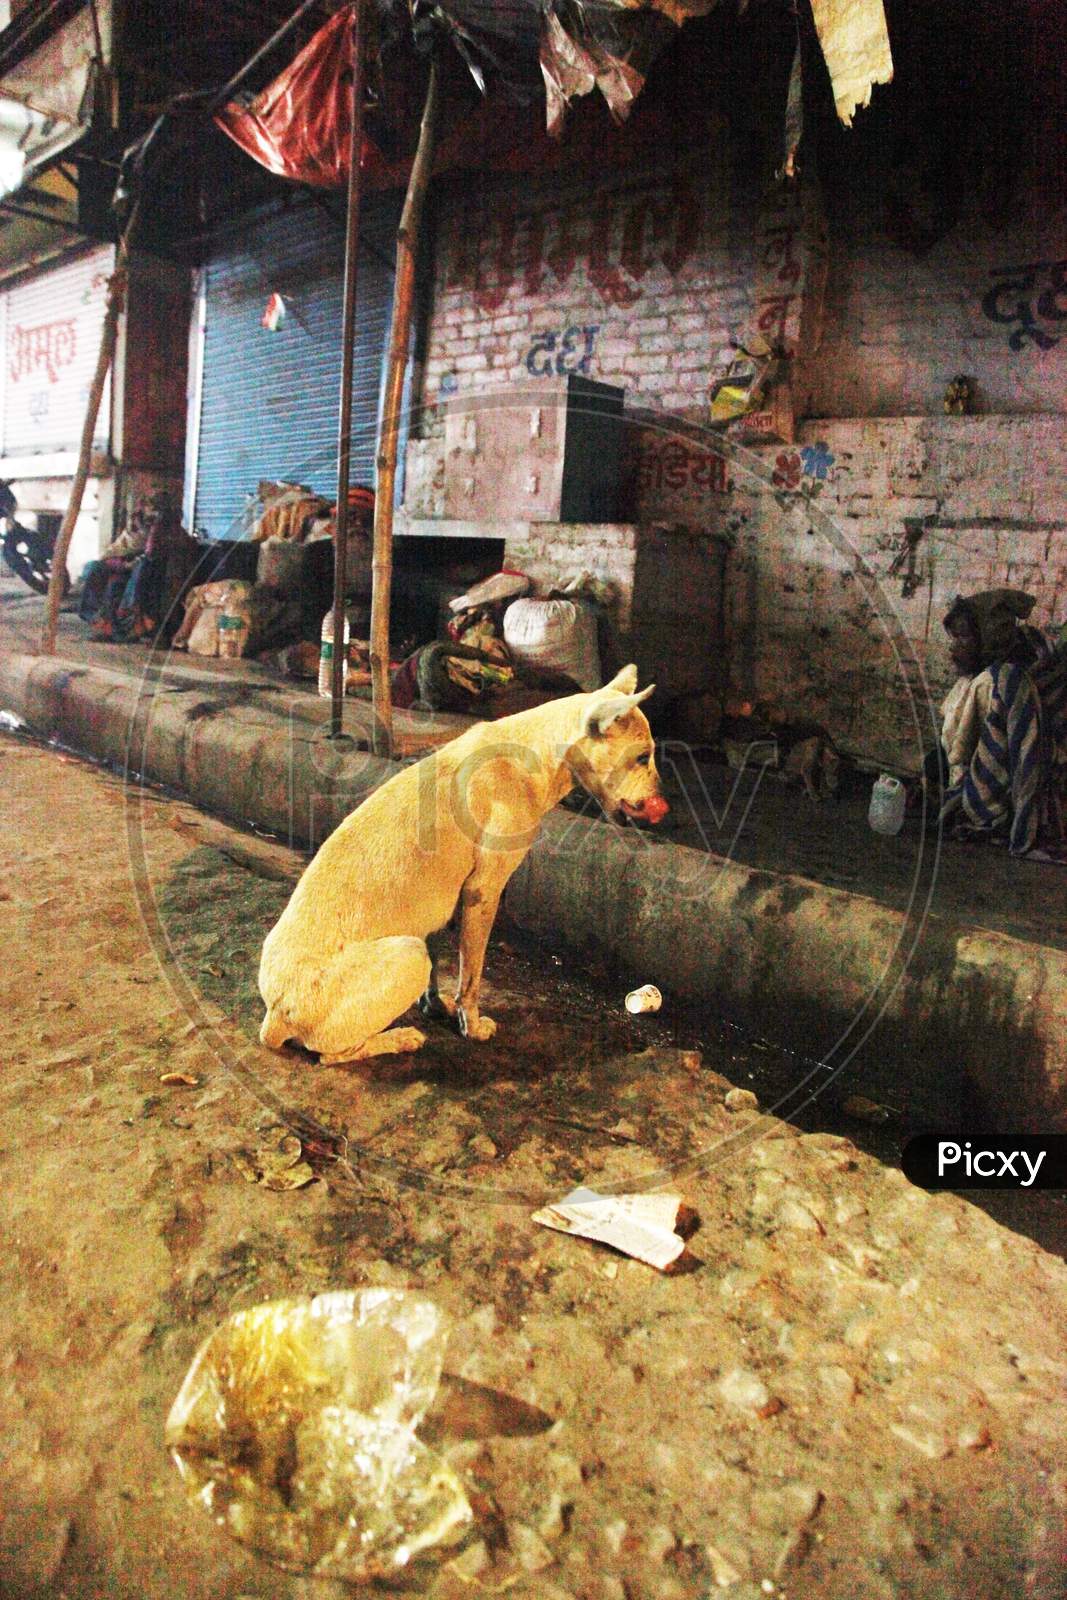 A Dog in the streets of Varanasi